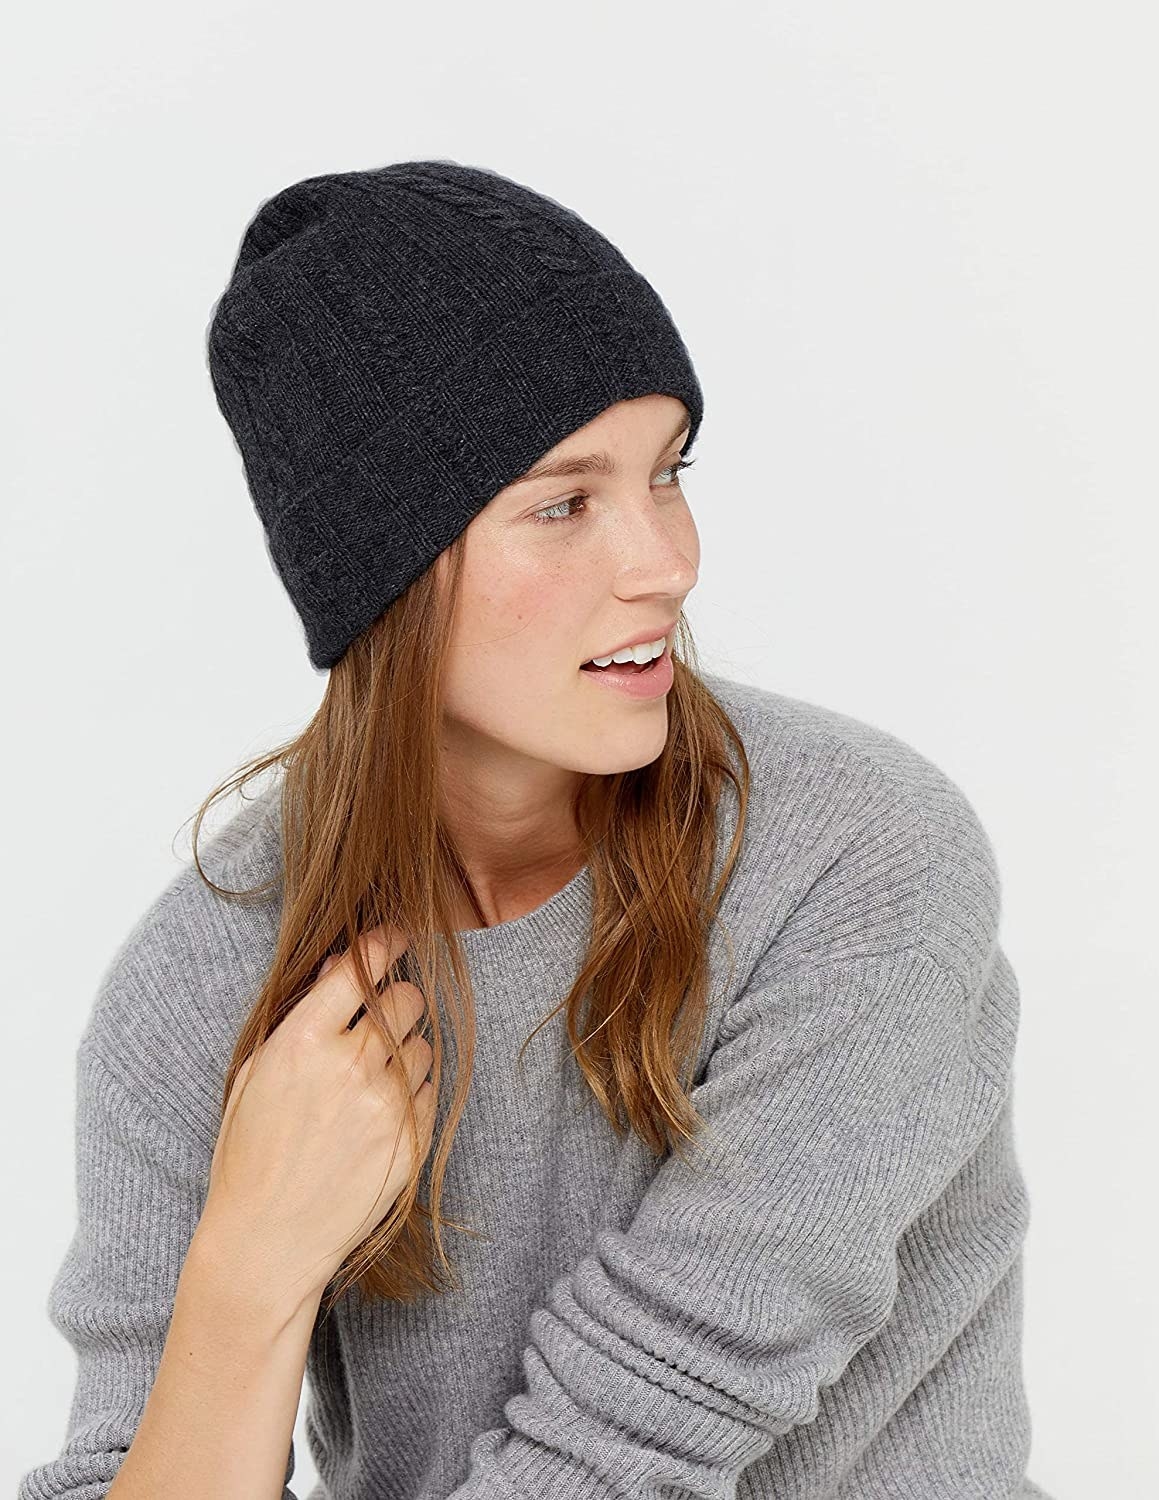 Model in the black beanie with a fold-over edge